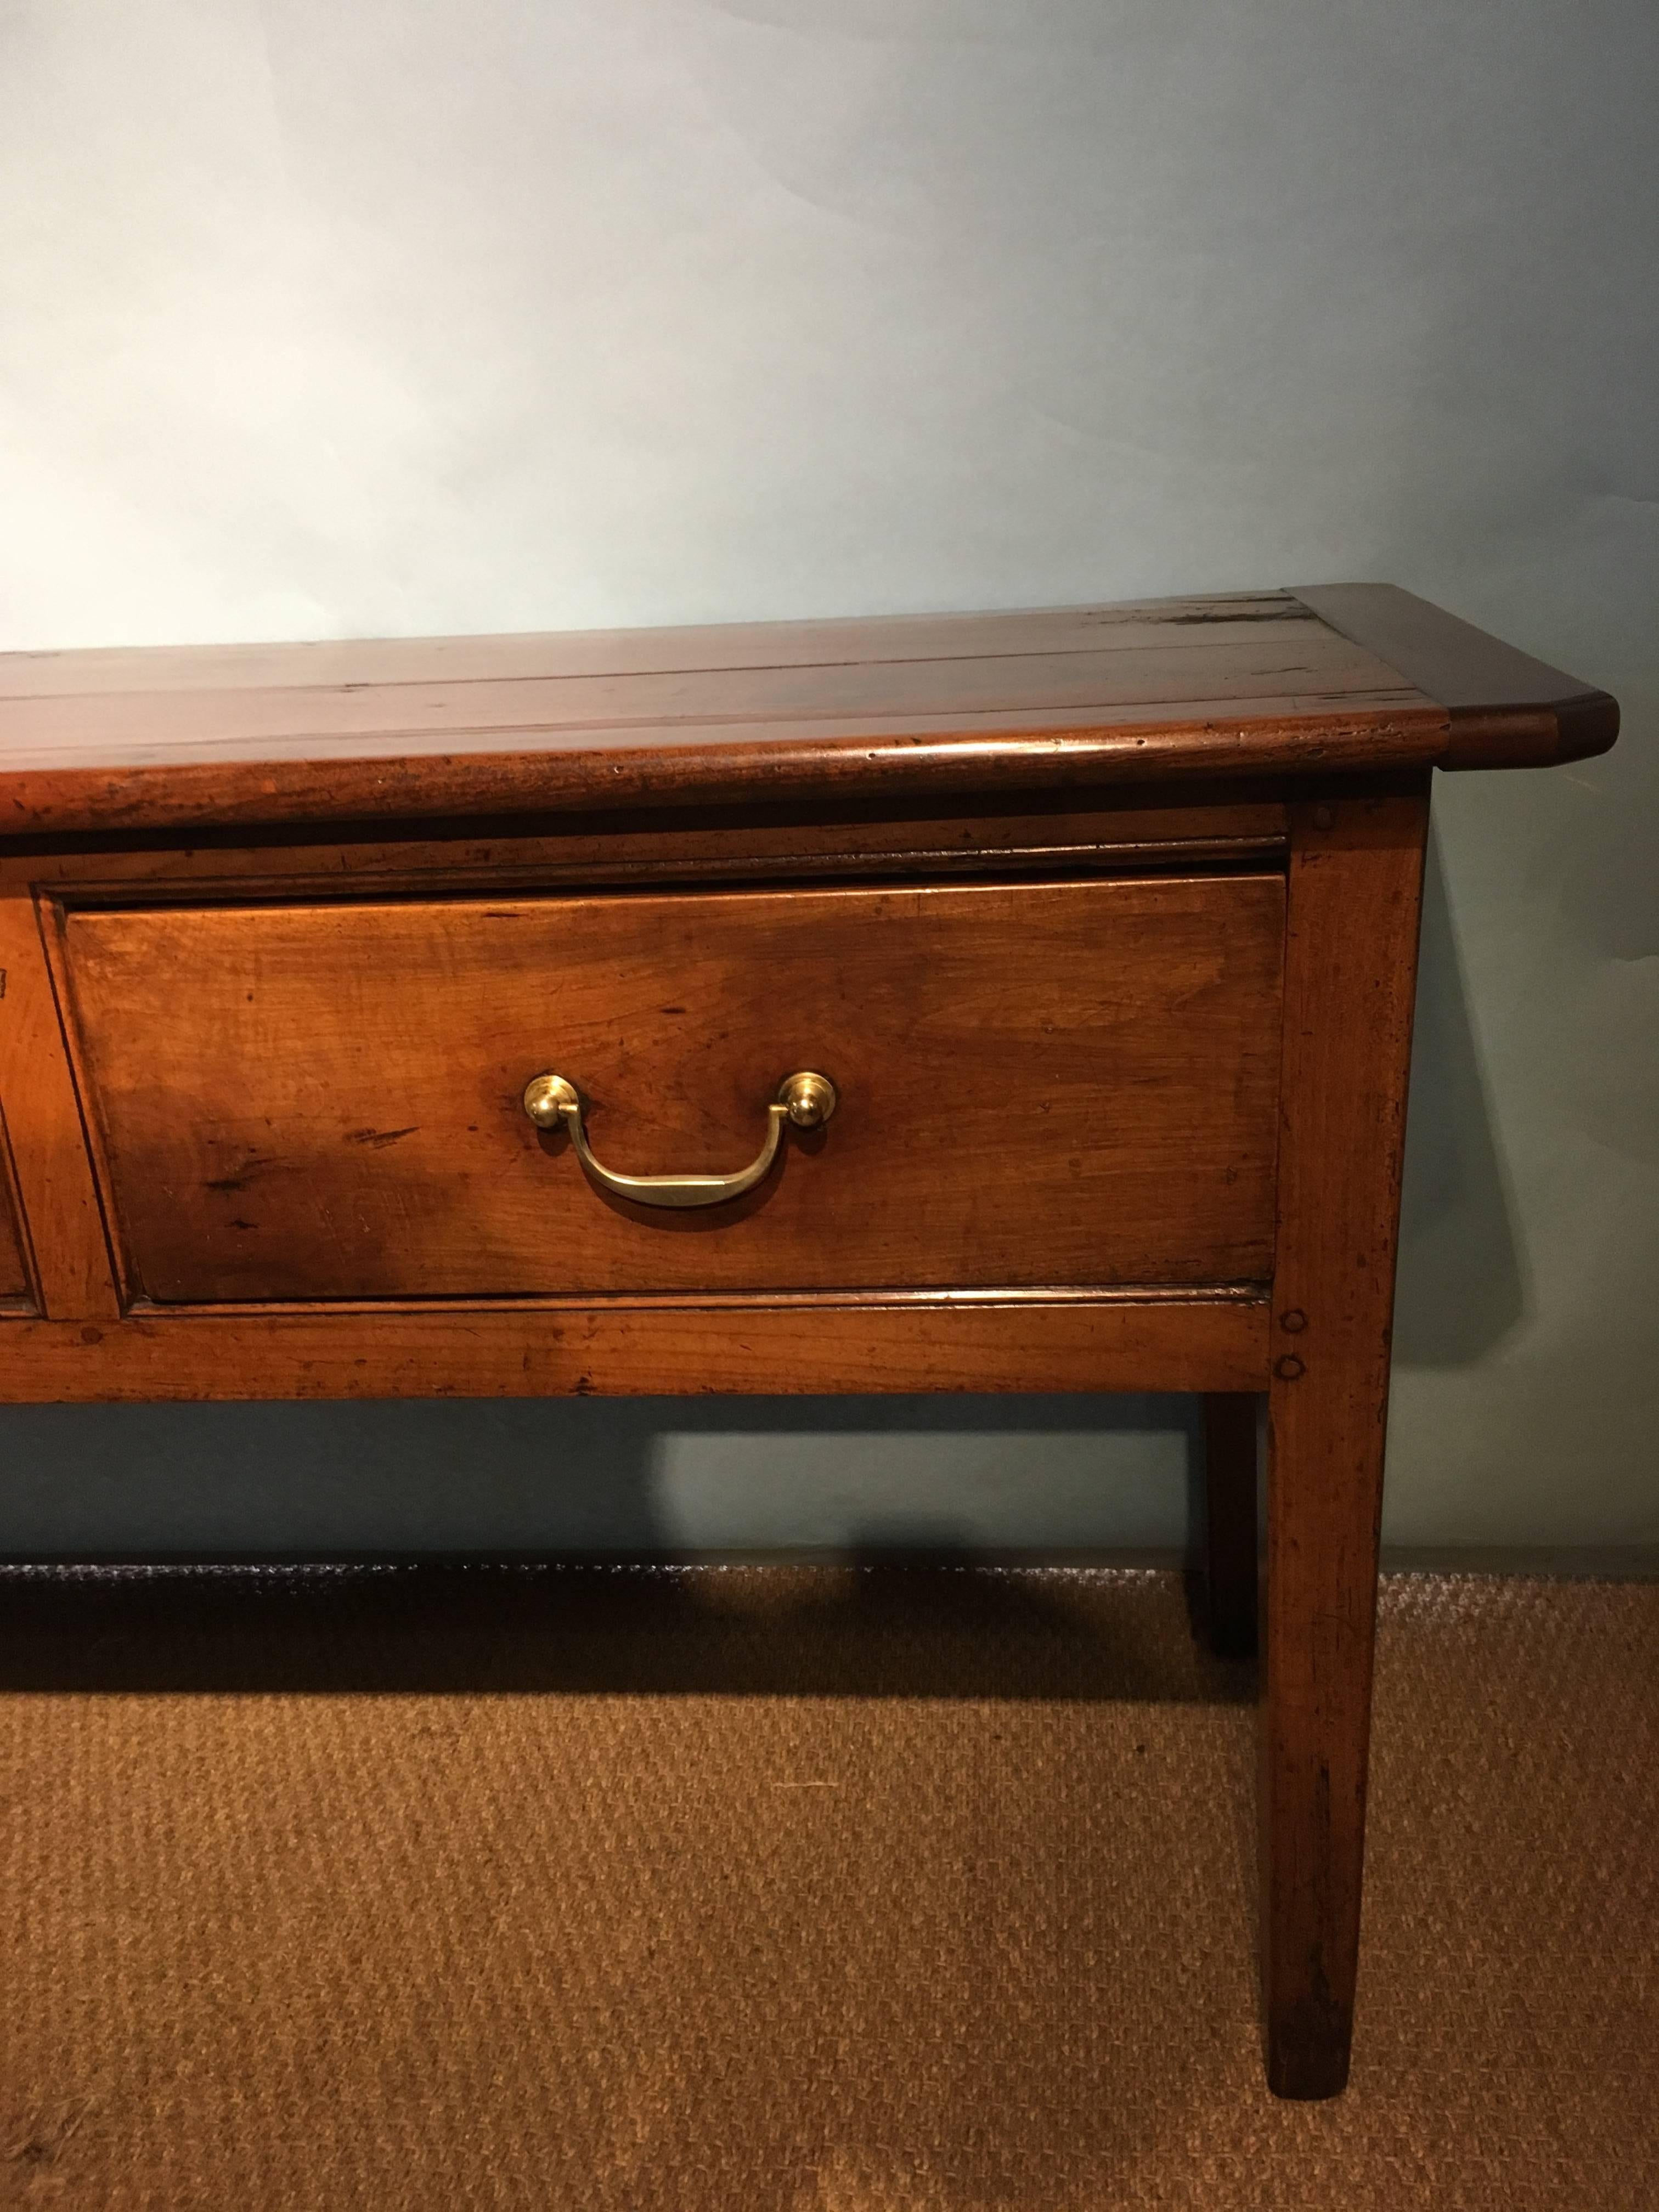 Good mid-19th century cherrywood dresser base / server. 

Measures: H 30 inches 77 cms 
W 70 inches 178 cms
D 20 inches 50 cms.